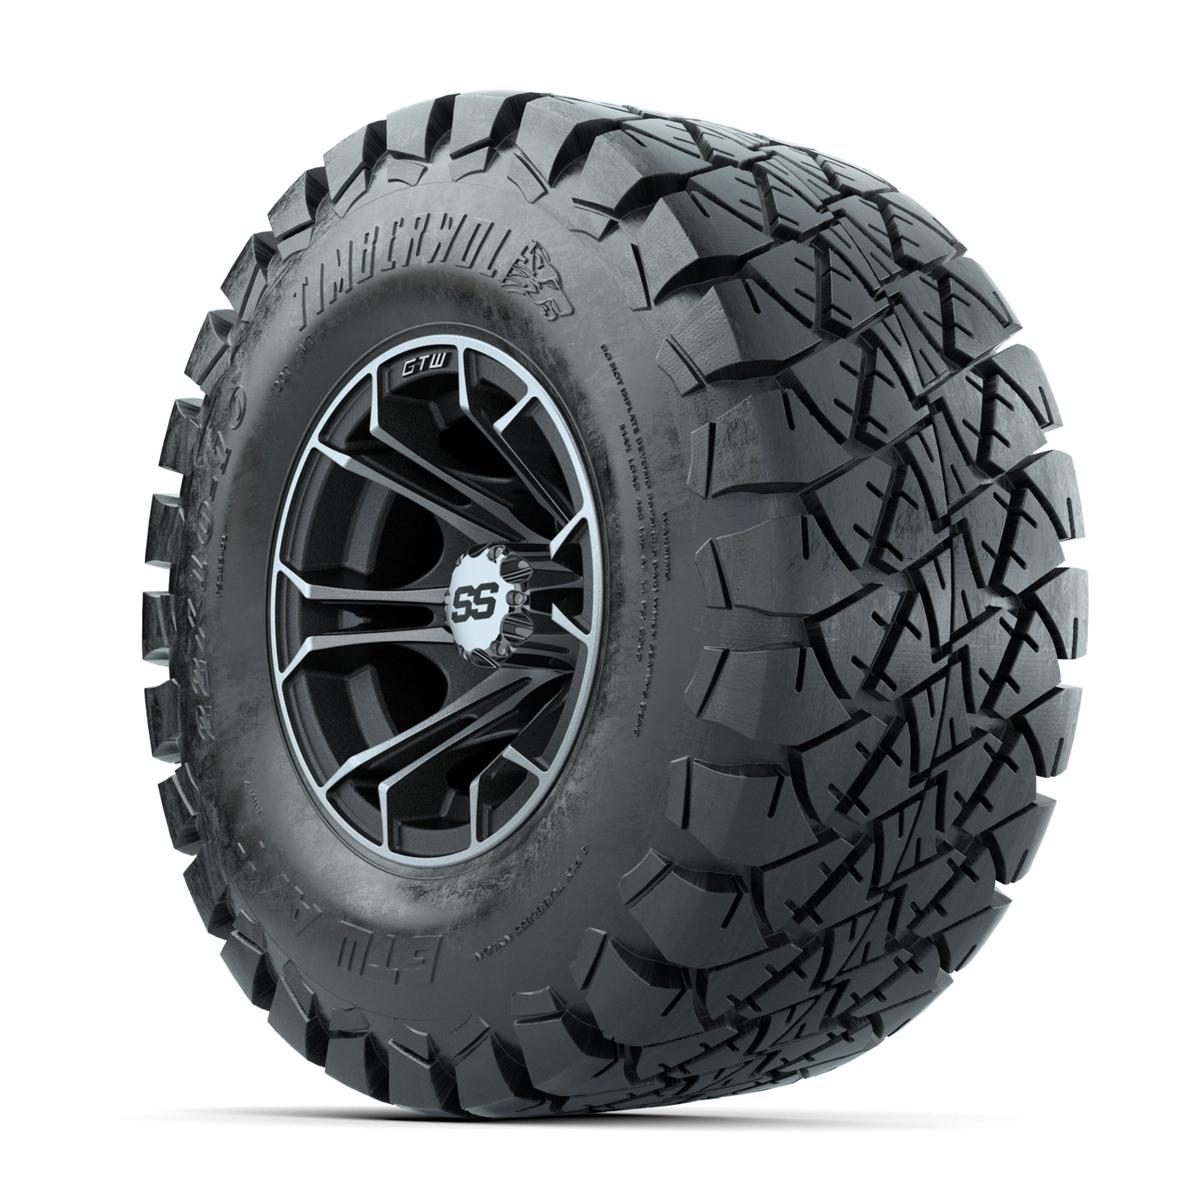 GTW Spyder Machined/Matte Grey 10 in Wheels with 22x10-10 Timberwolf All Terrain Tires – Full Set